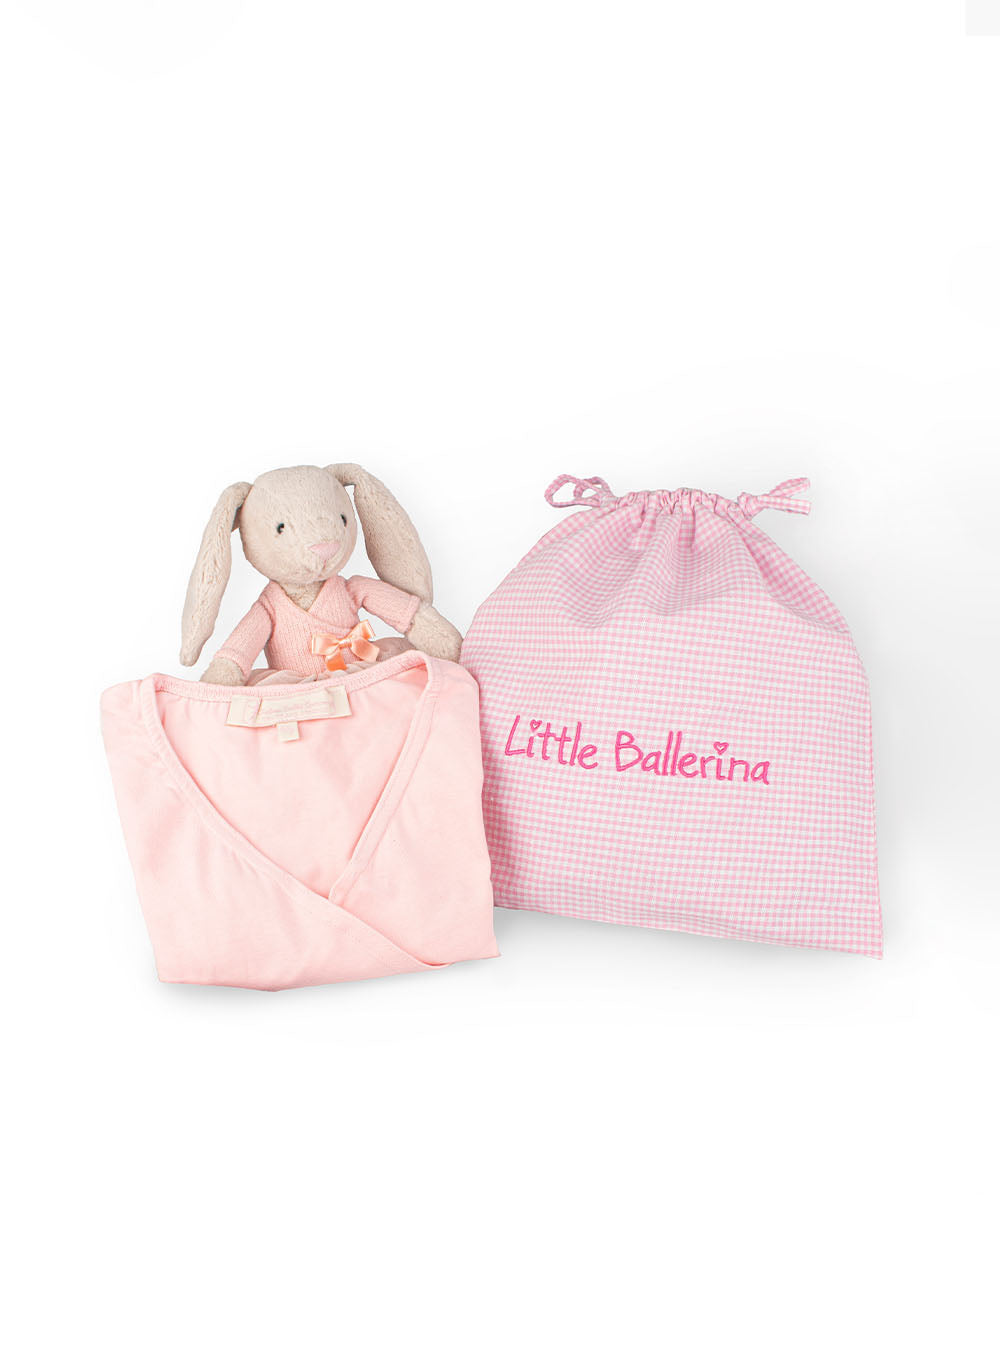 Personalised Embroidery Ballet Dance Bag Ballerina Kid Toddler Teen Dancer  with Double Layer Shoe Compartment Adjustable Strap - AliExpress